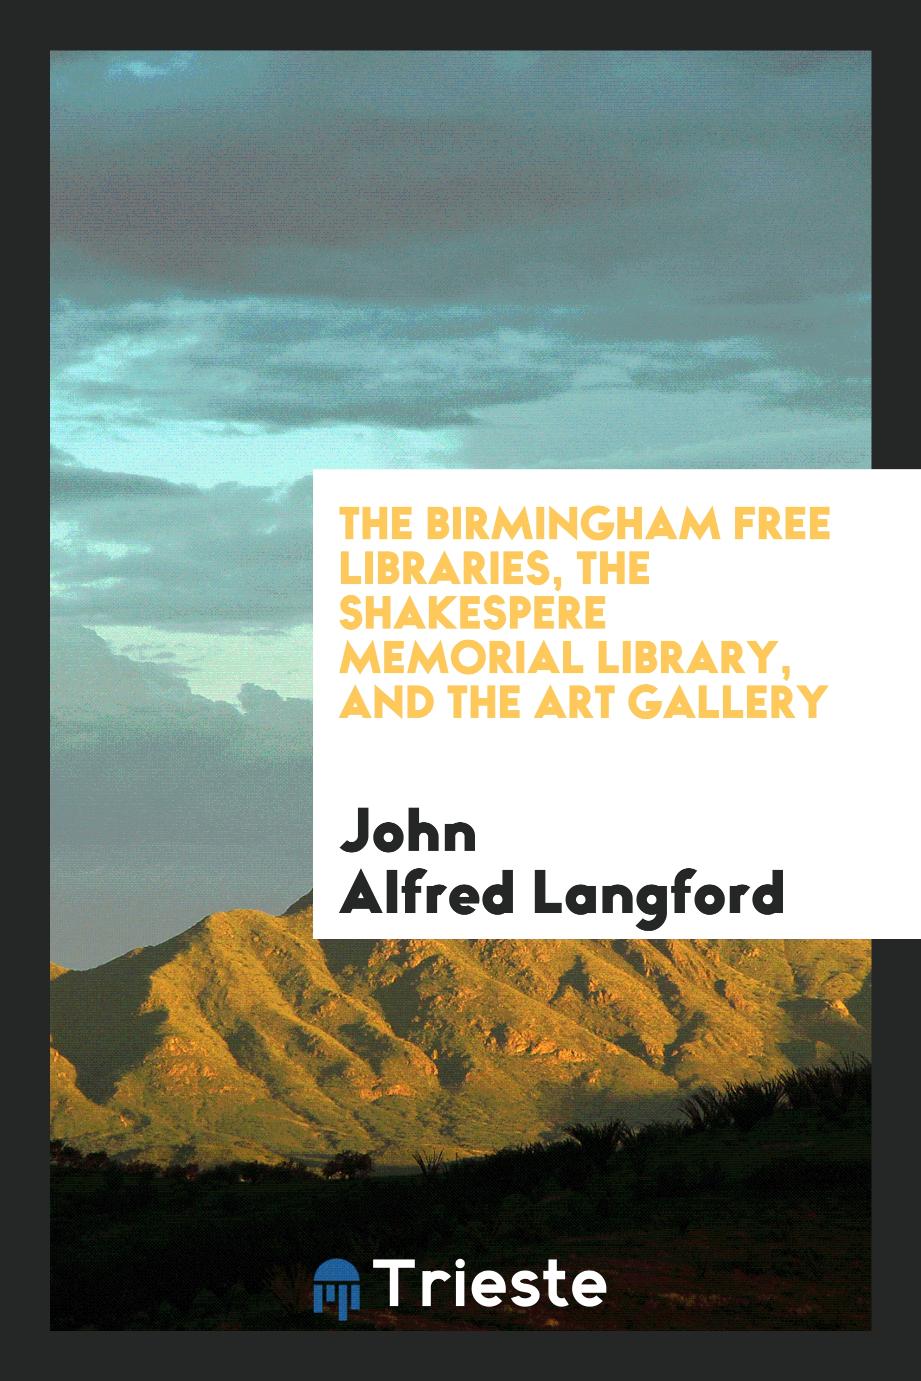 The Birmingham Free Libraries, the Shakespere Memorial Library, and the Art Gallery